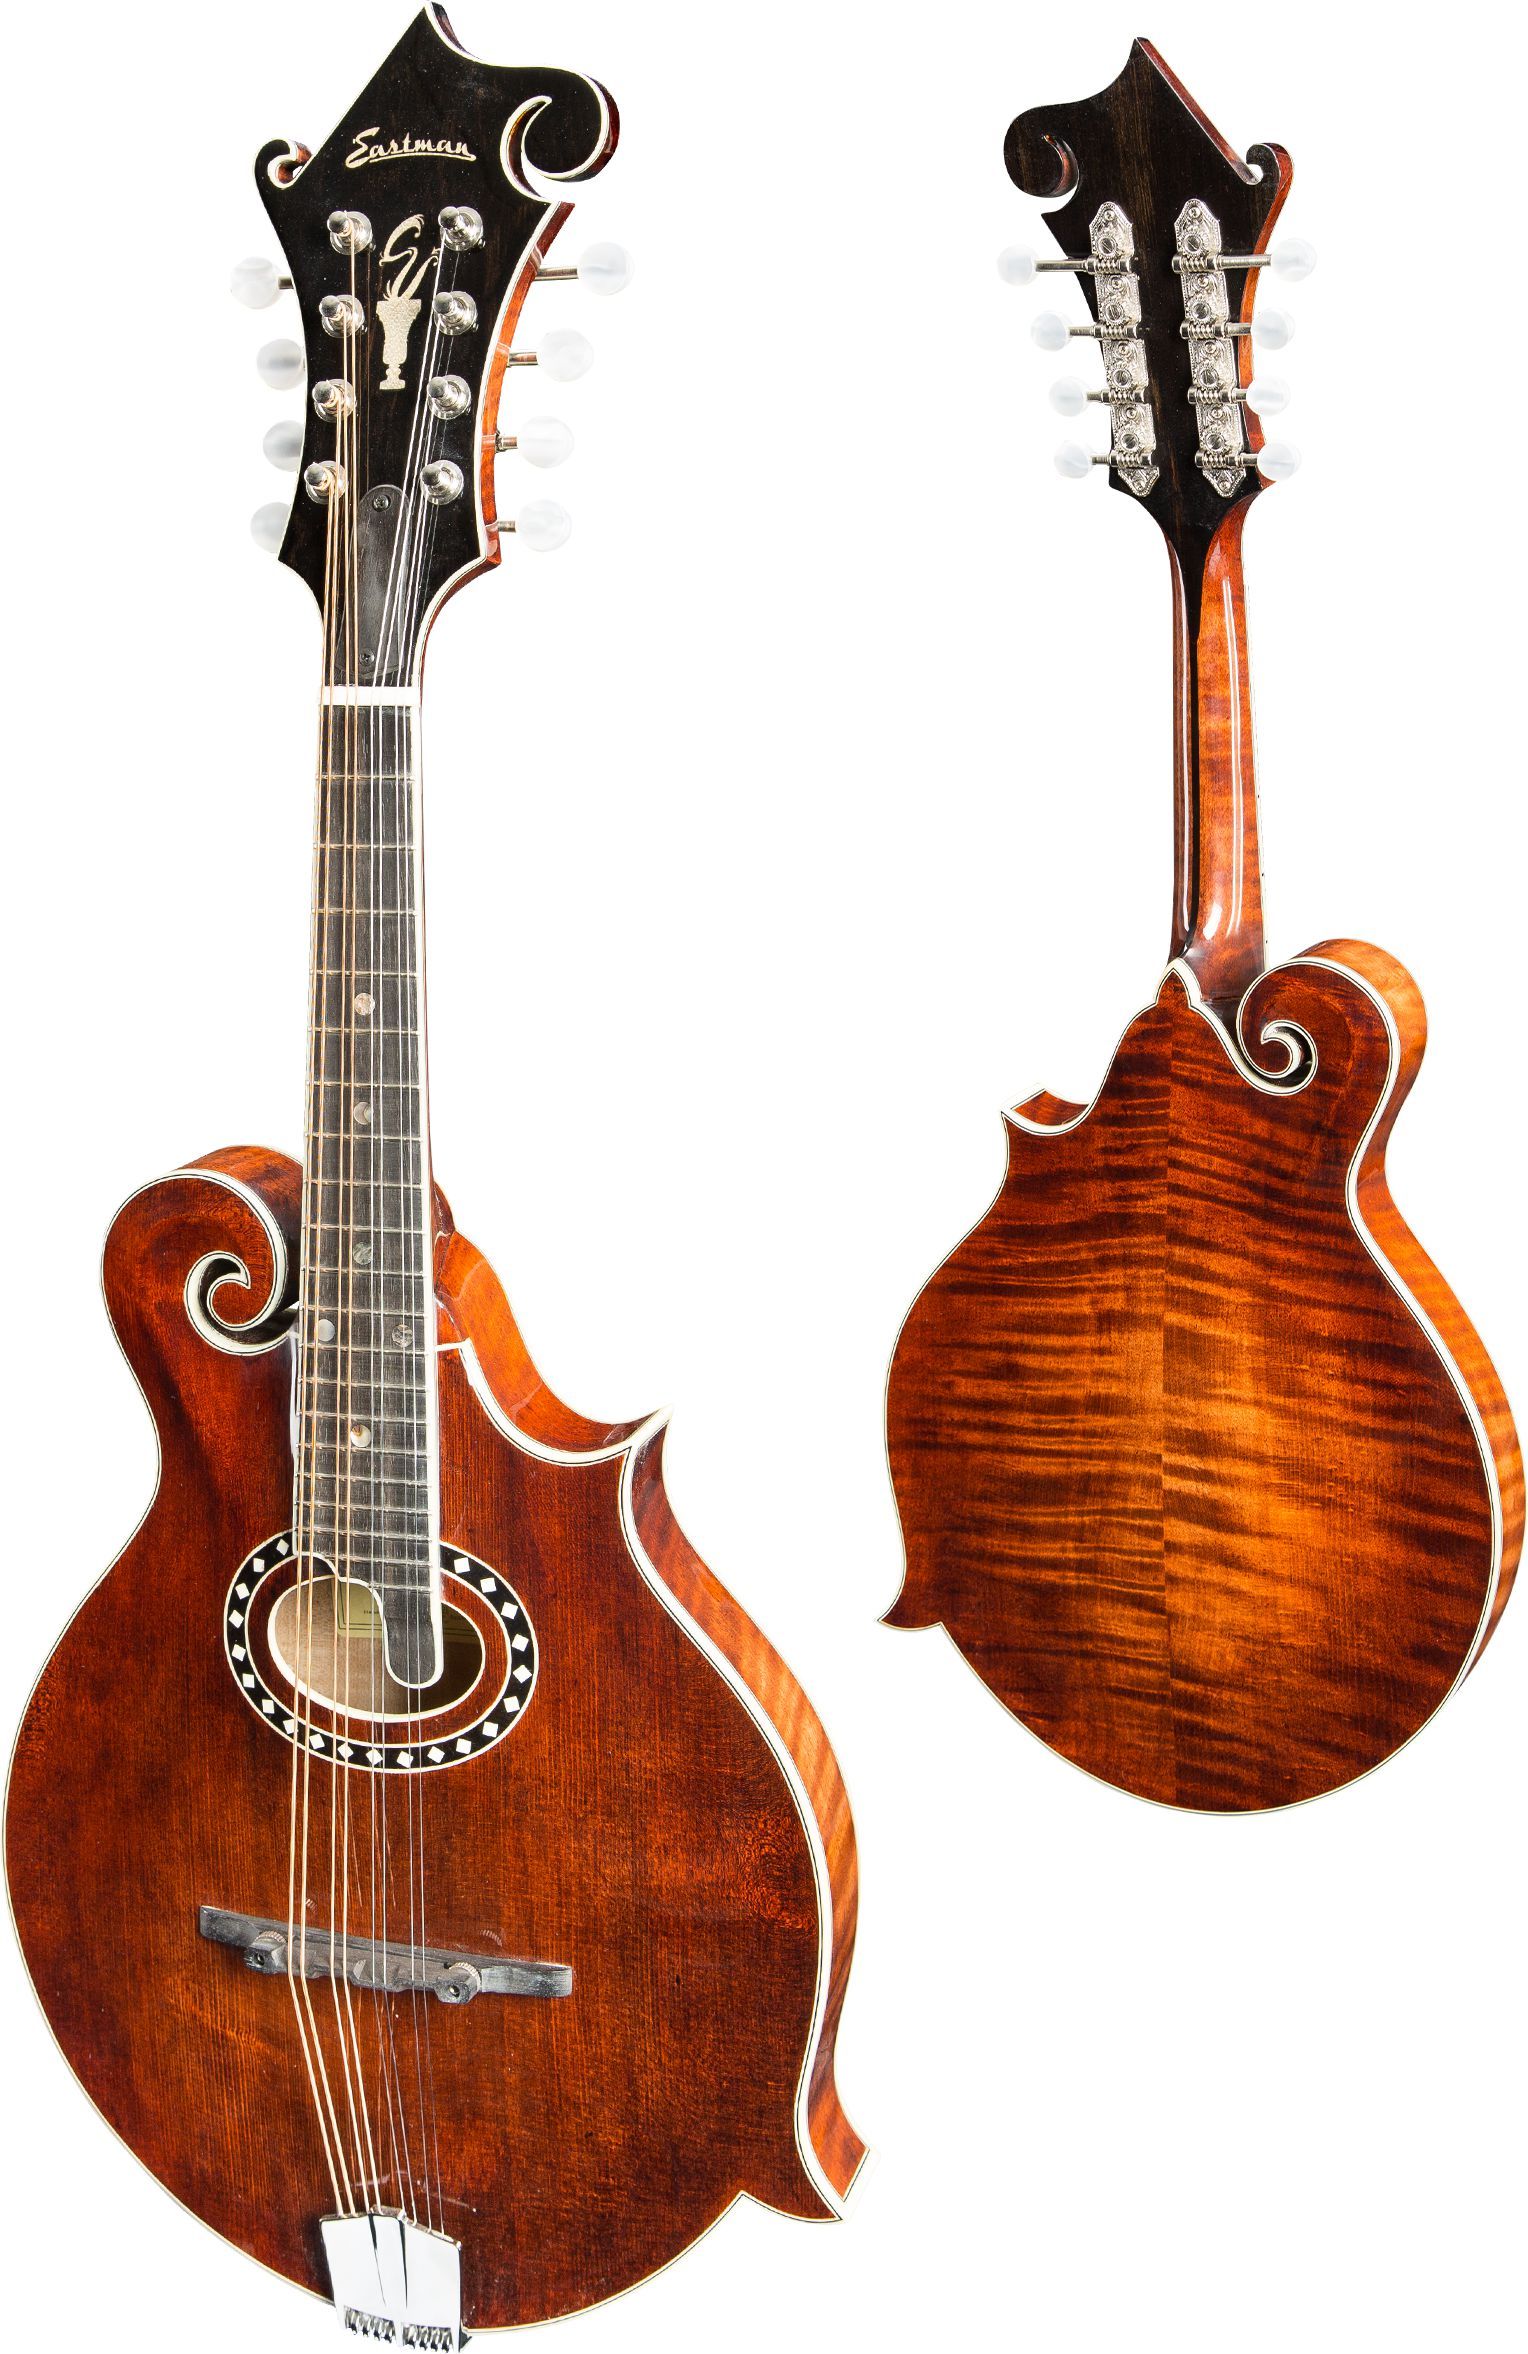 Eastman MD814 F-style Mandolin (oval hole, Solid Adirondack spruce top, Solid AAA Maple back and sides, w/Case), Mandolin for sale at Richards Guitars.